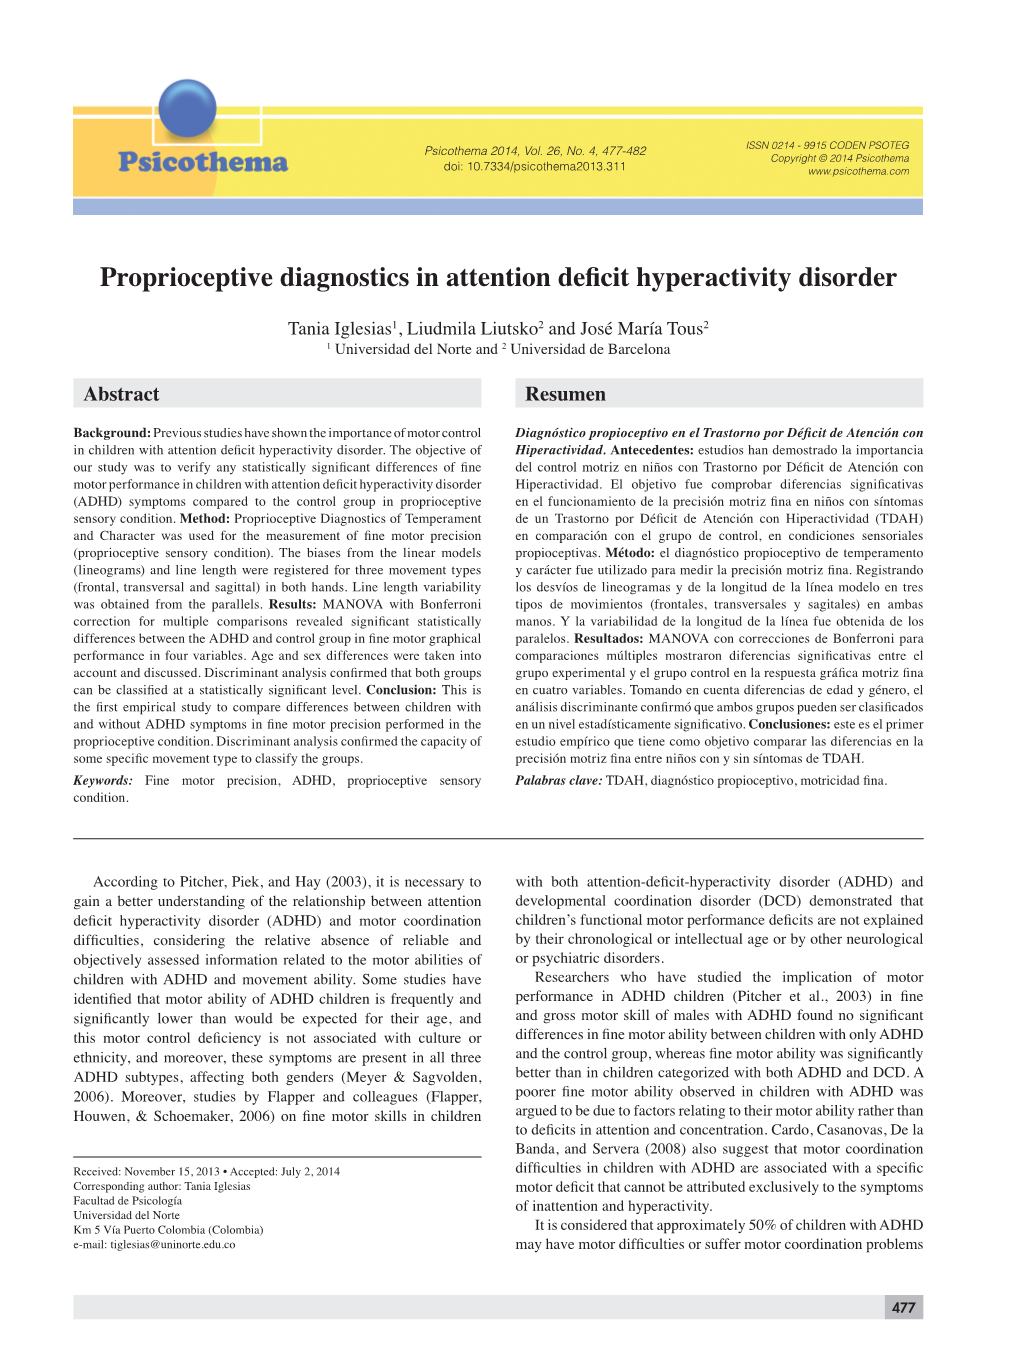 Proprioceptive Diagnostics in Attention Deficit Hyperactivity Disorder